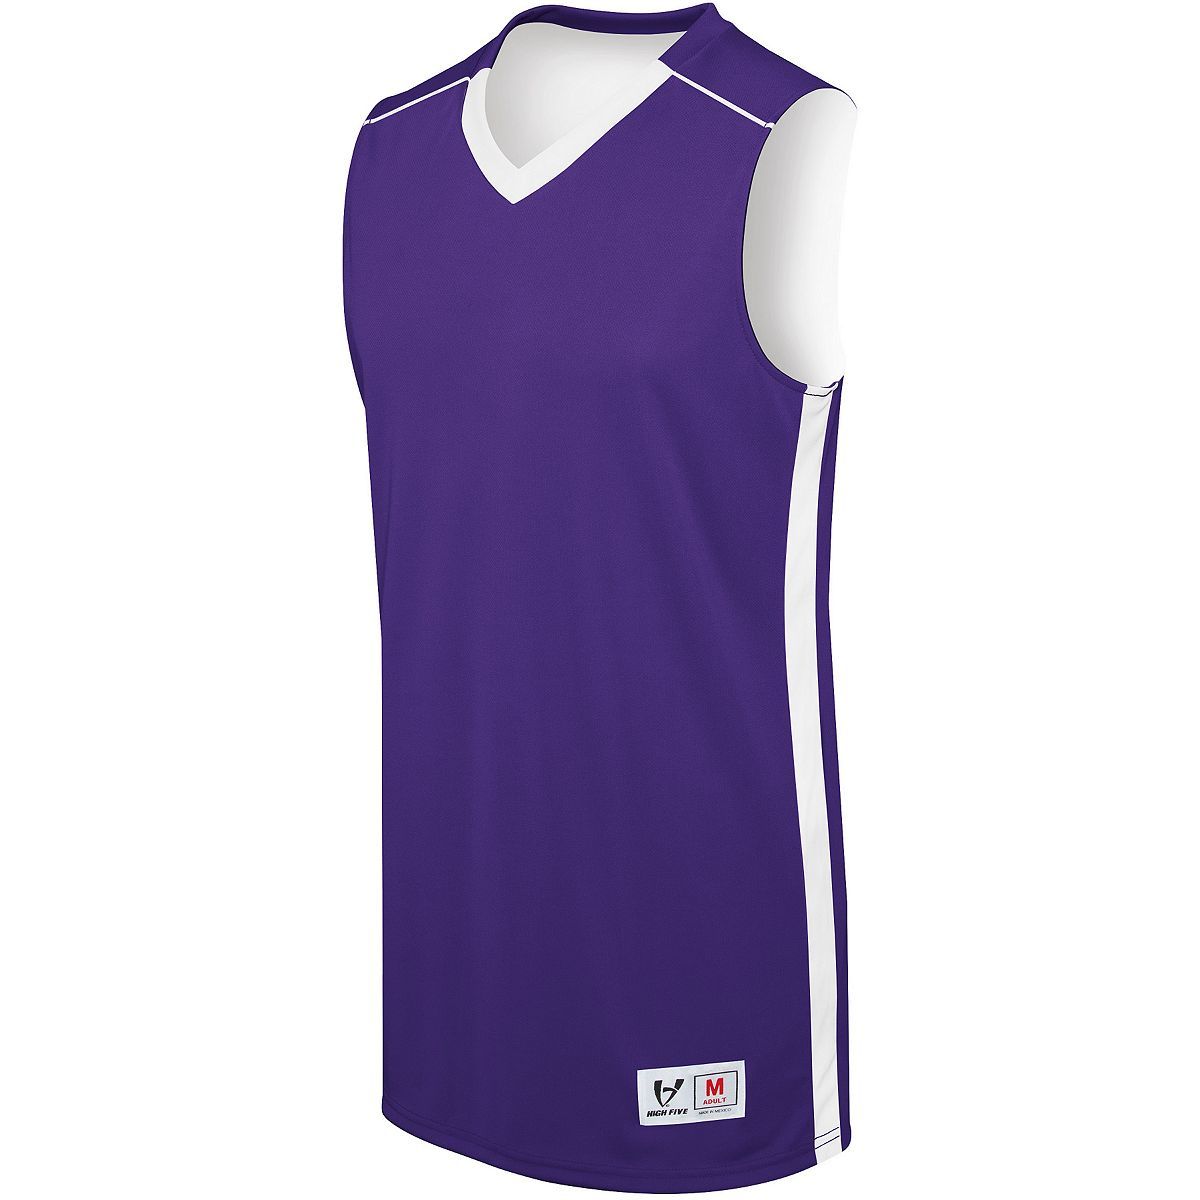 Augusta Sportswear Youth Competition Reversible Jersey in Purple/White  -Part of the Youth, Youth-Jersey, Augusta-Products, Basketball, Shirts, All-Sports, All-Sports-1 product lines at KanaleyCreations.com